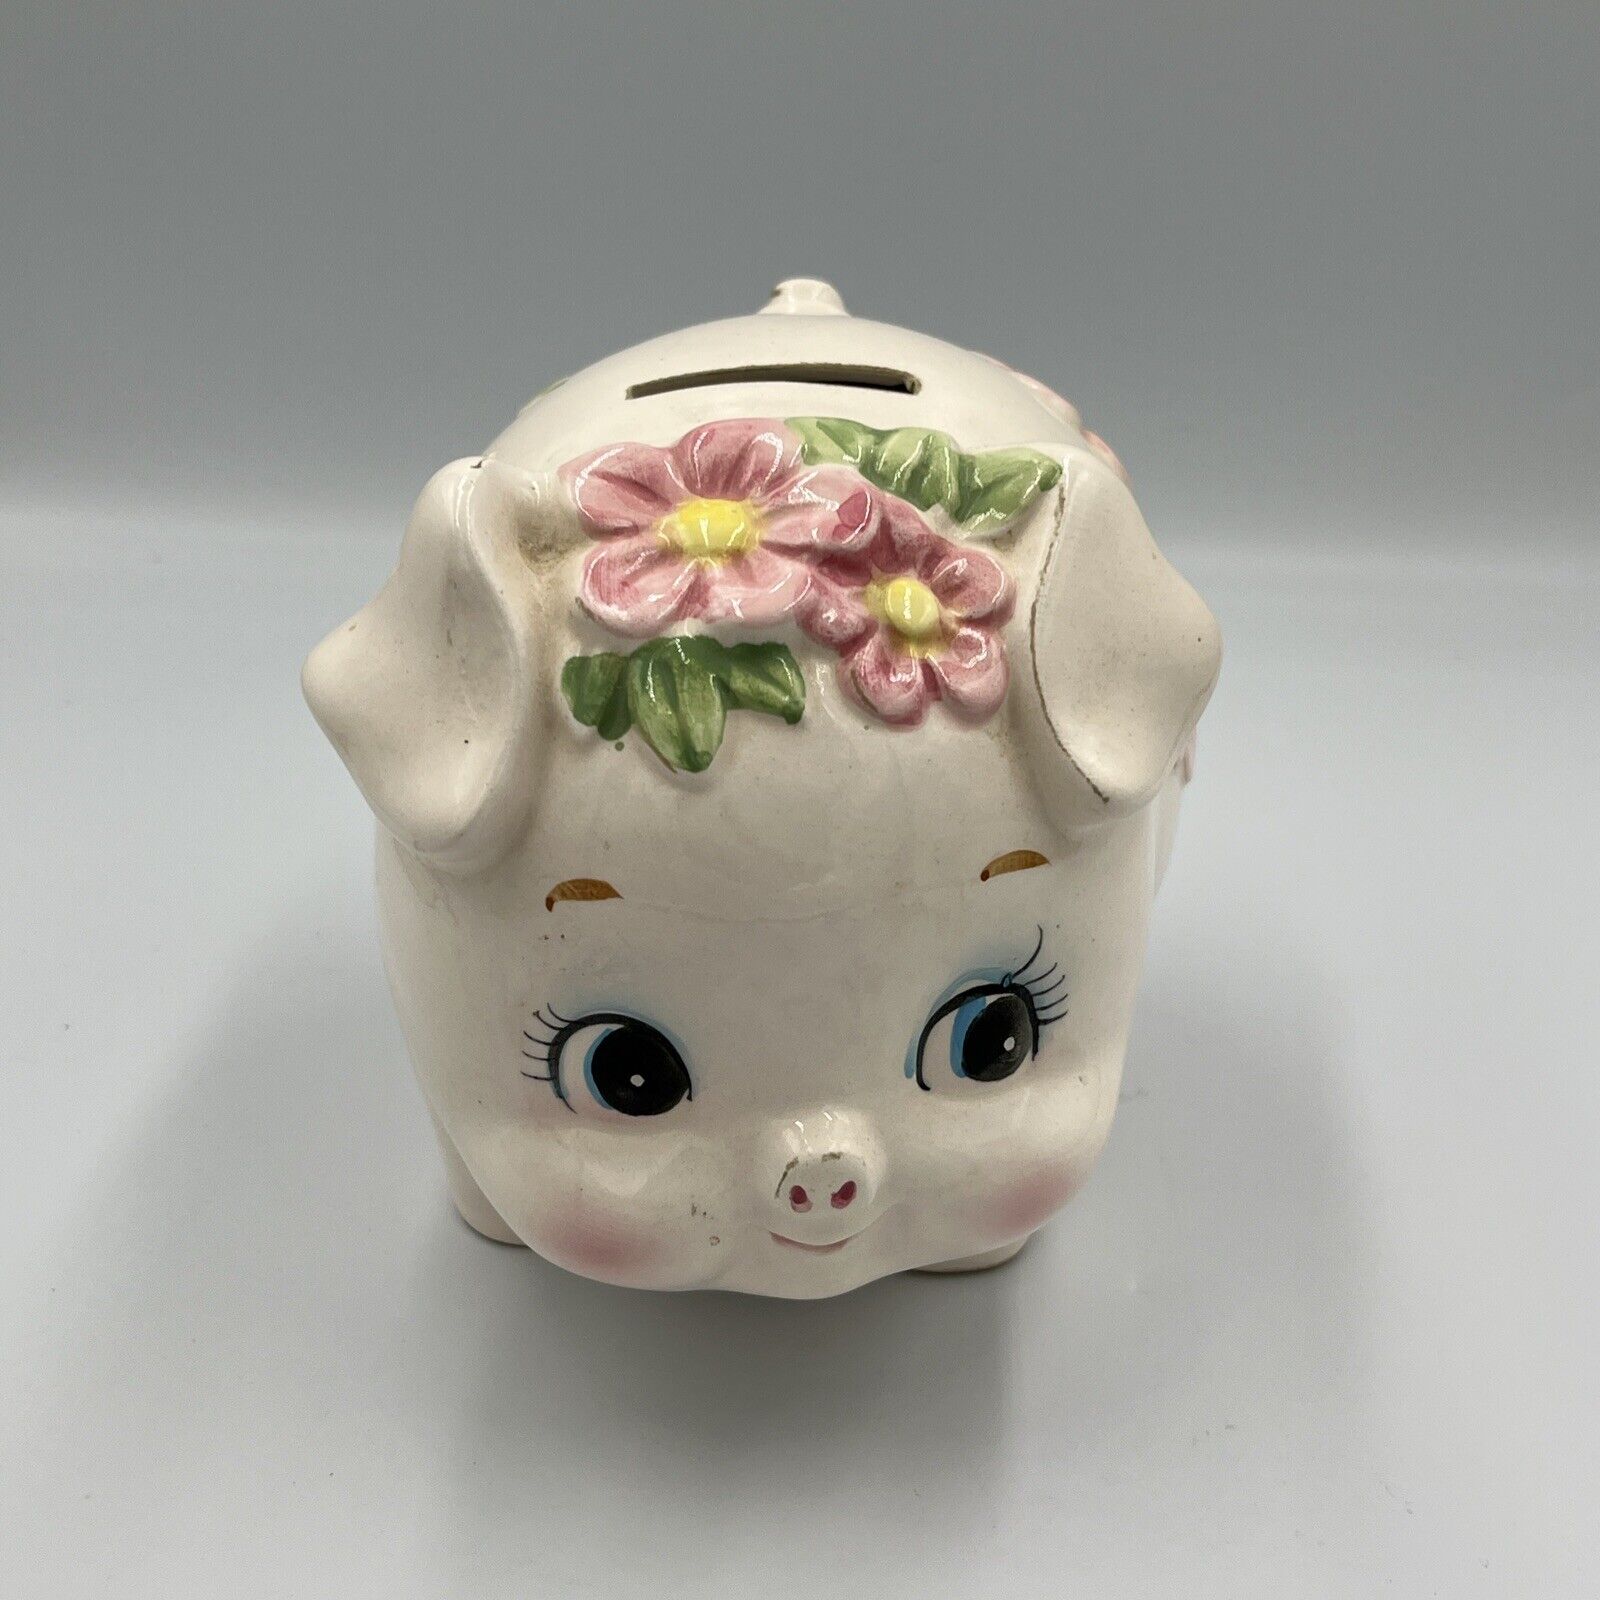 Smaller vintage ceramic piggy bank Cute With Flowers